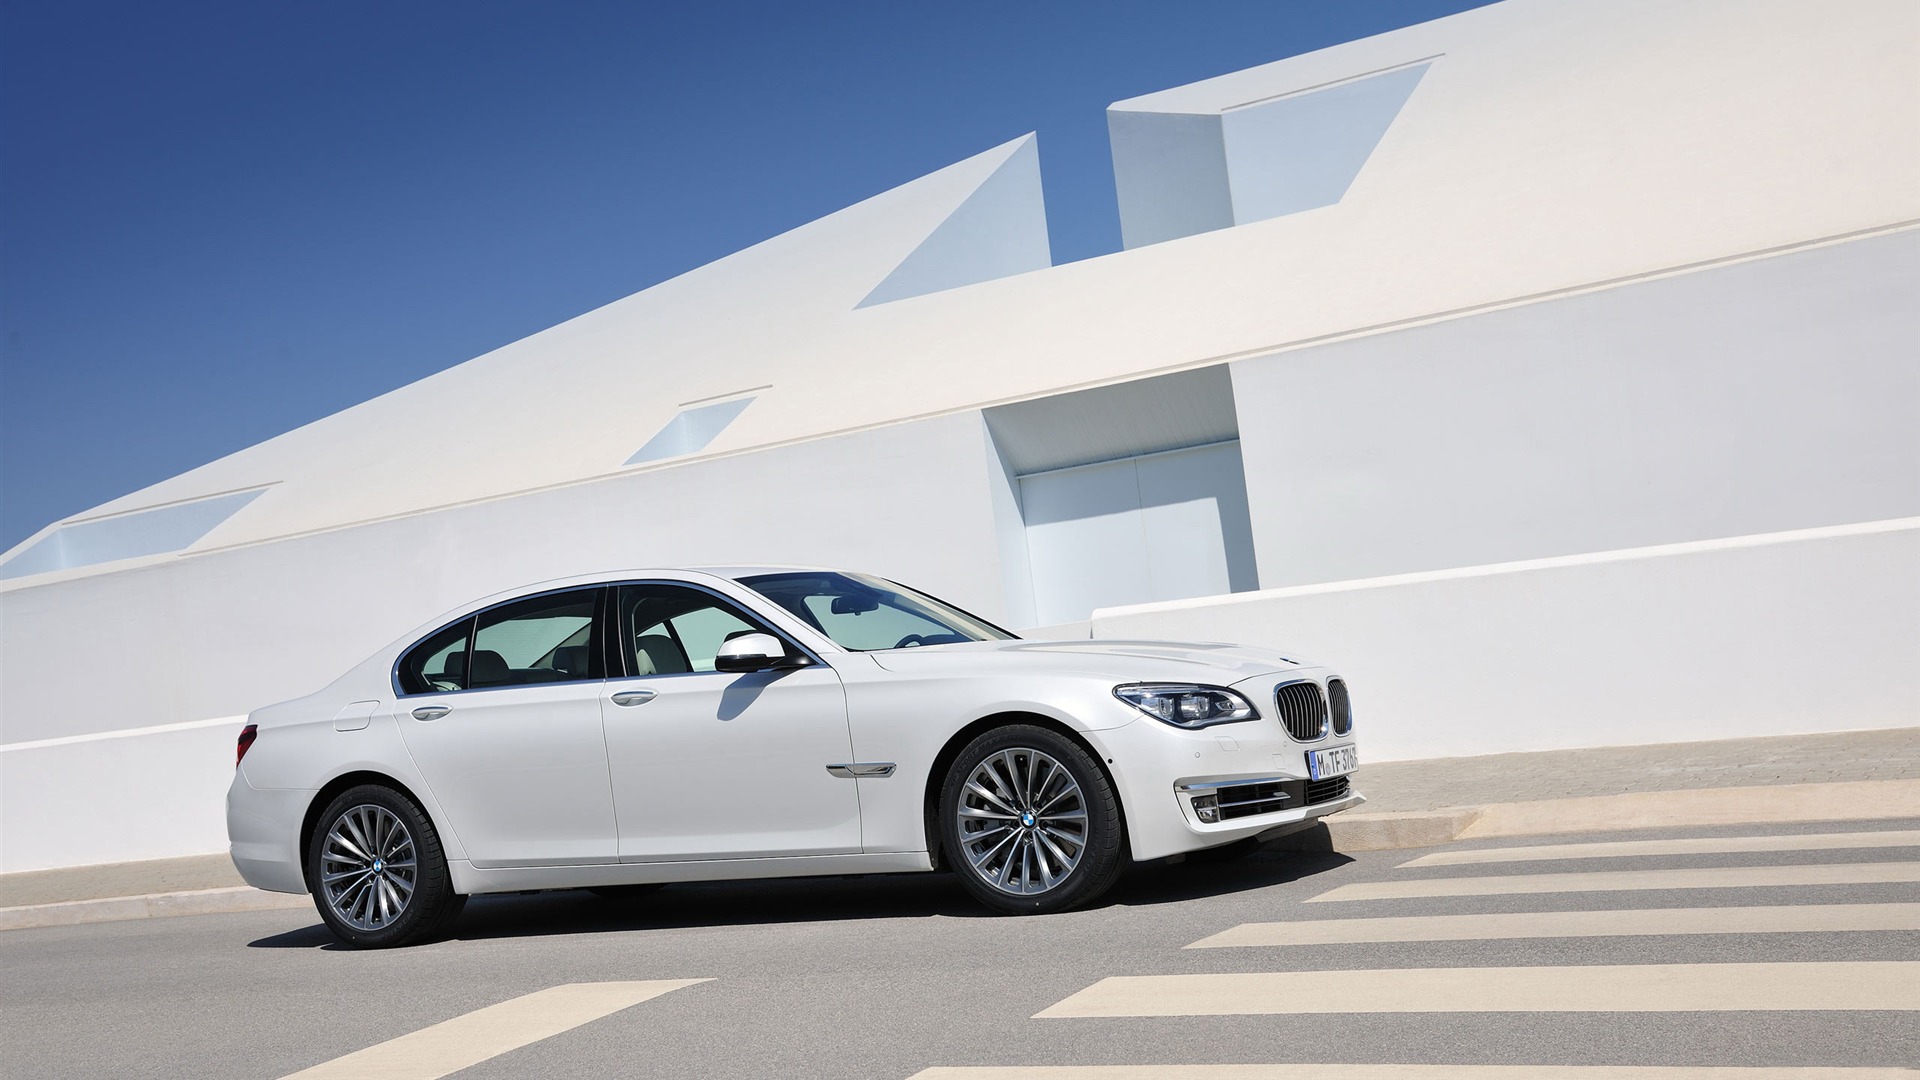 Blackberry Touch: BMW 7-Series Individual 2009 cars wallpapers, images ...